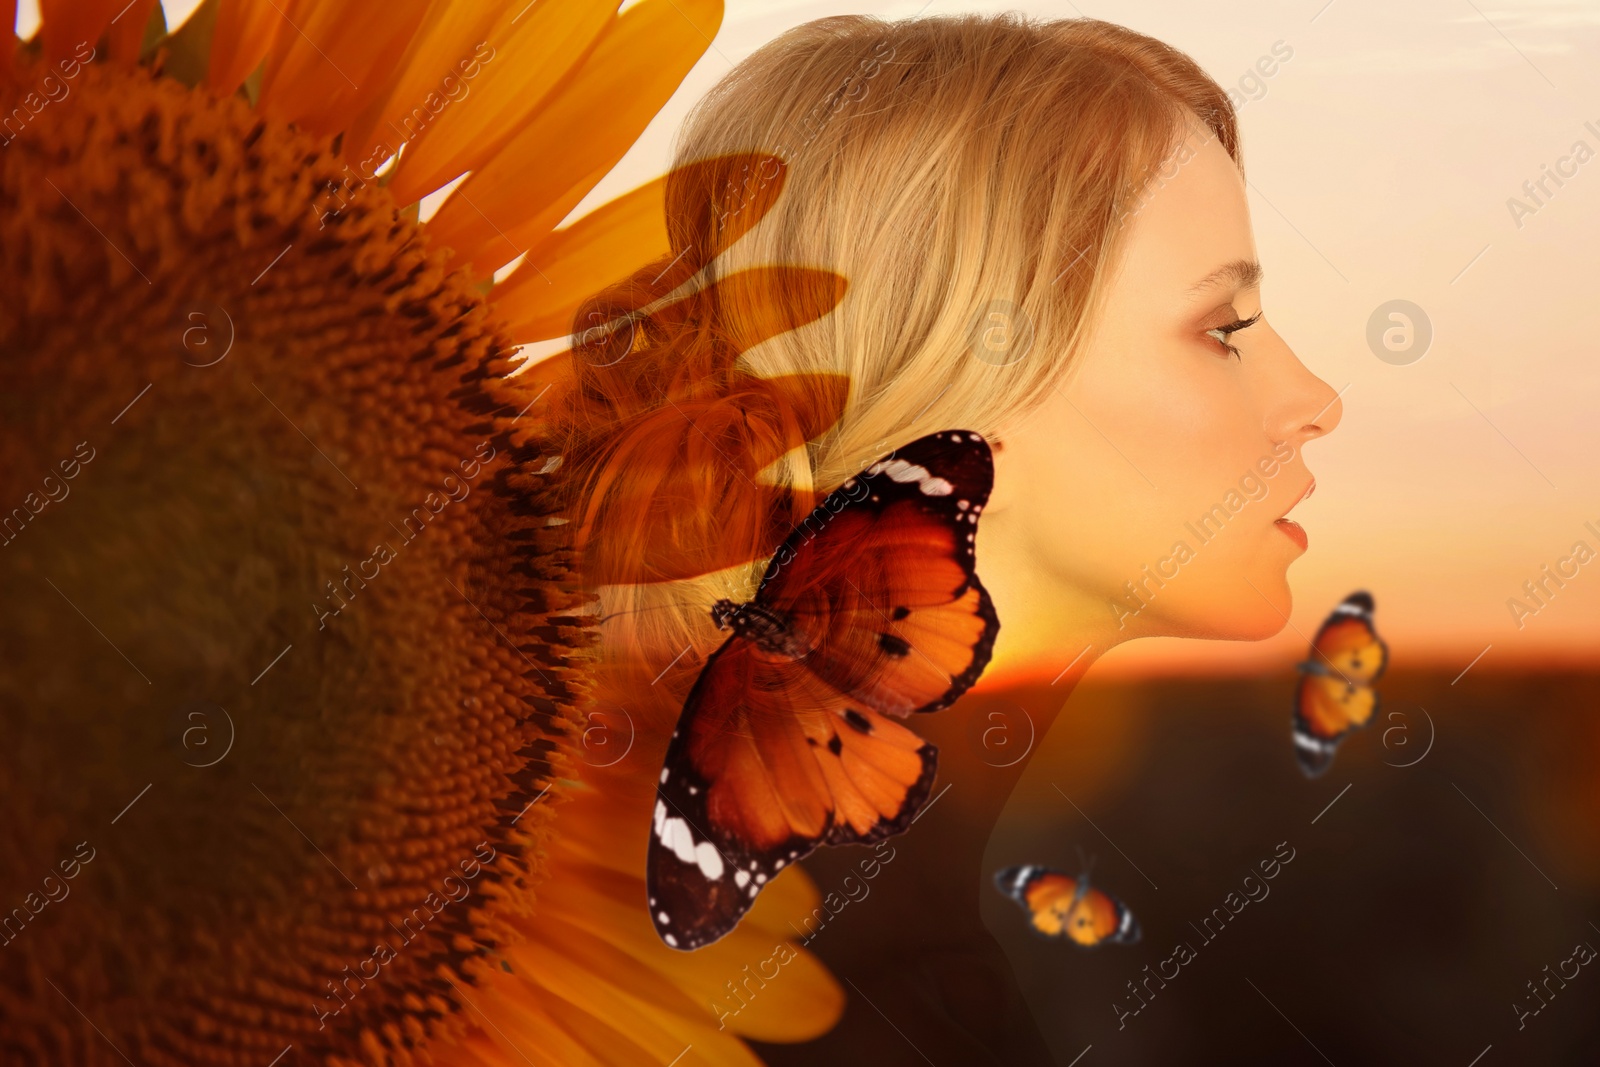 Image of Harmony, balance, mindfulness. Beautiful woman, sunflower and butterflies in field at sunset, double exposure